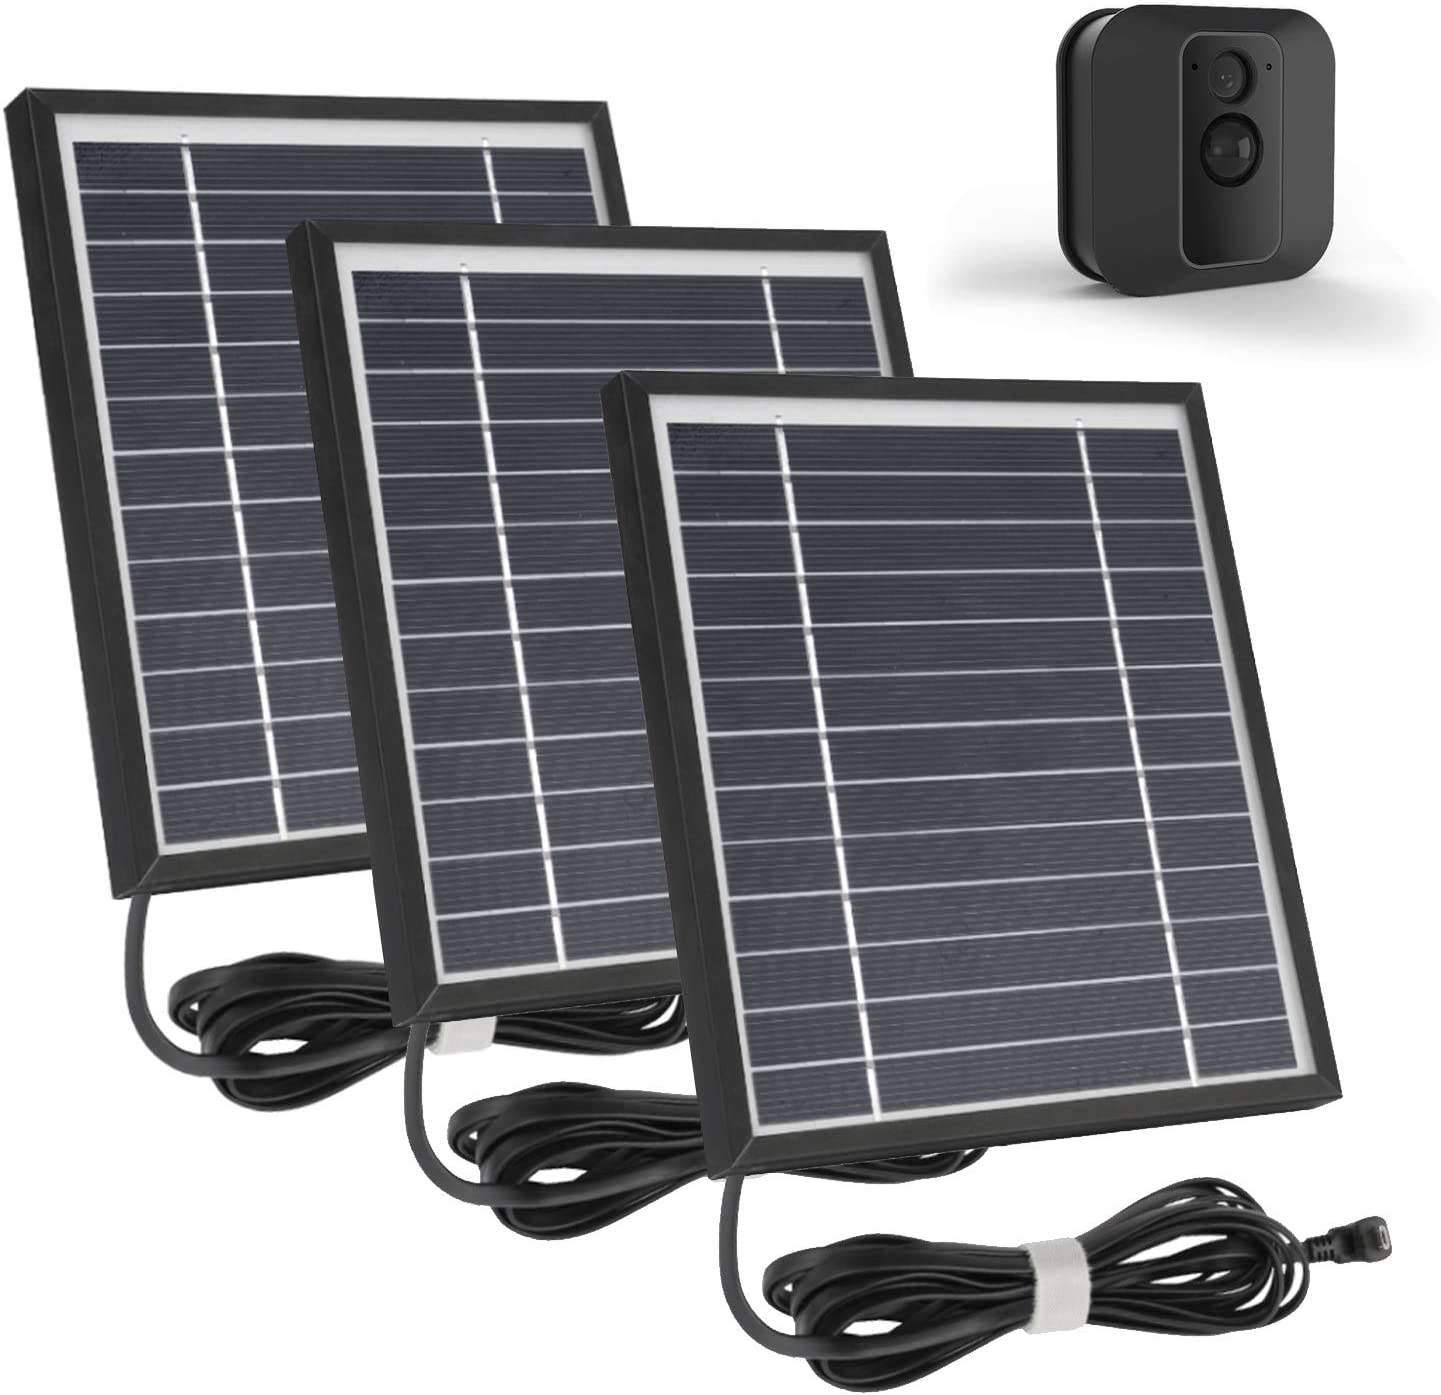 iTODOS 3 Pack Solar Panel Works for Blink XT XT2, 11.5Ft Outdoor Power Charging Cable and Adjustable Mount,Weatherproof, Power Your Blink Camera continuously – Black